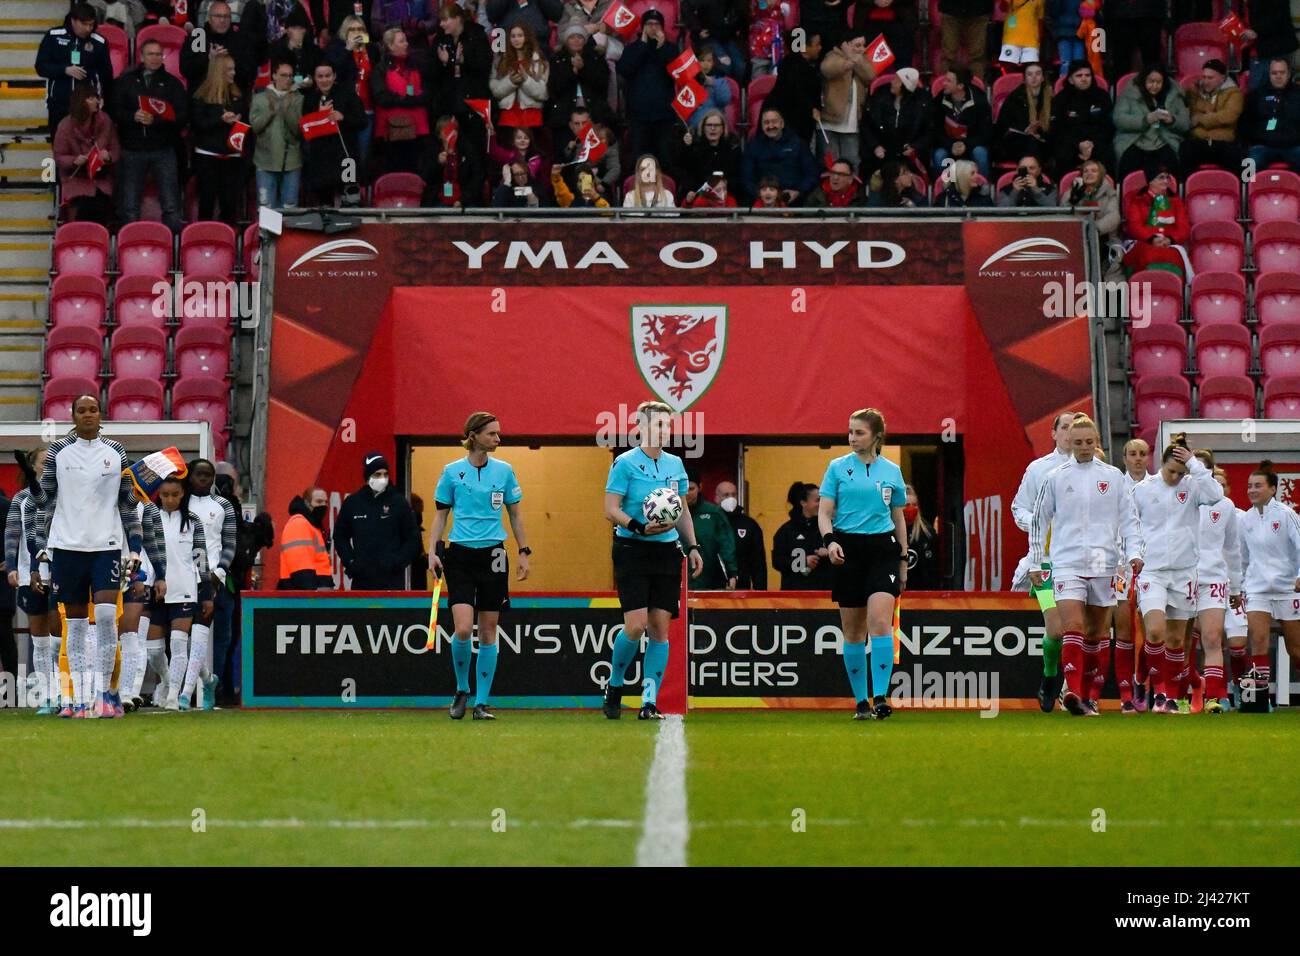 Llanelli, Wales. 8 April 2022. The teams walking out onto the pitch before the FIFA Women's World Cup Qualifier Group I match between Wales Women and France Women at Parc y Scarlets in Llanelli, Wales, UK on 8 April 2022. Credit: Duncan Thomas/Majestic Media. Stock Photo